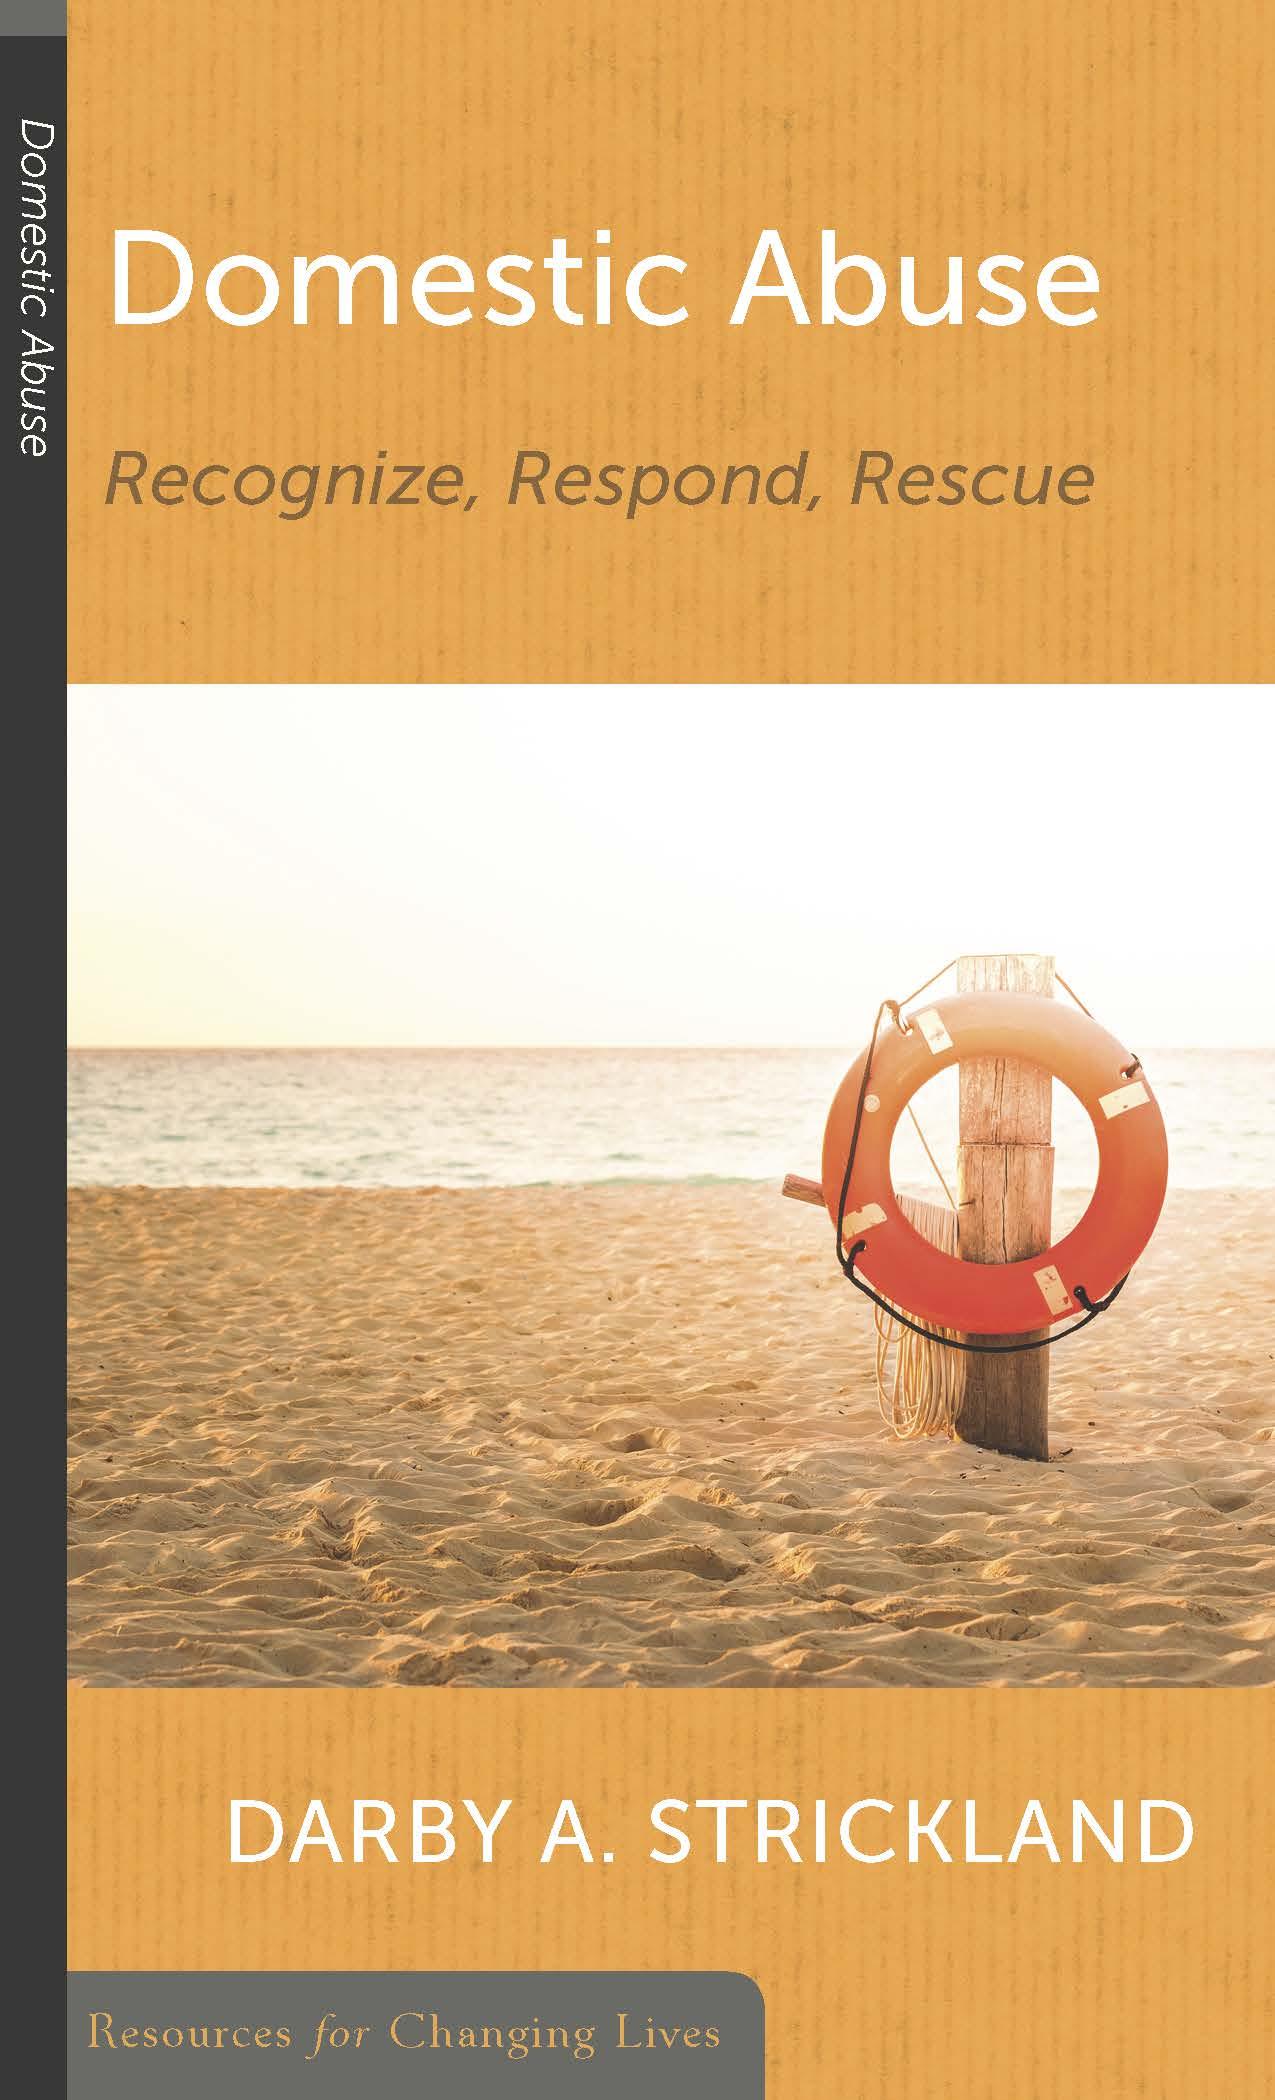 Domestic Abuse: Recognize, Respond, Rescue Featured Image